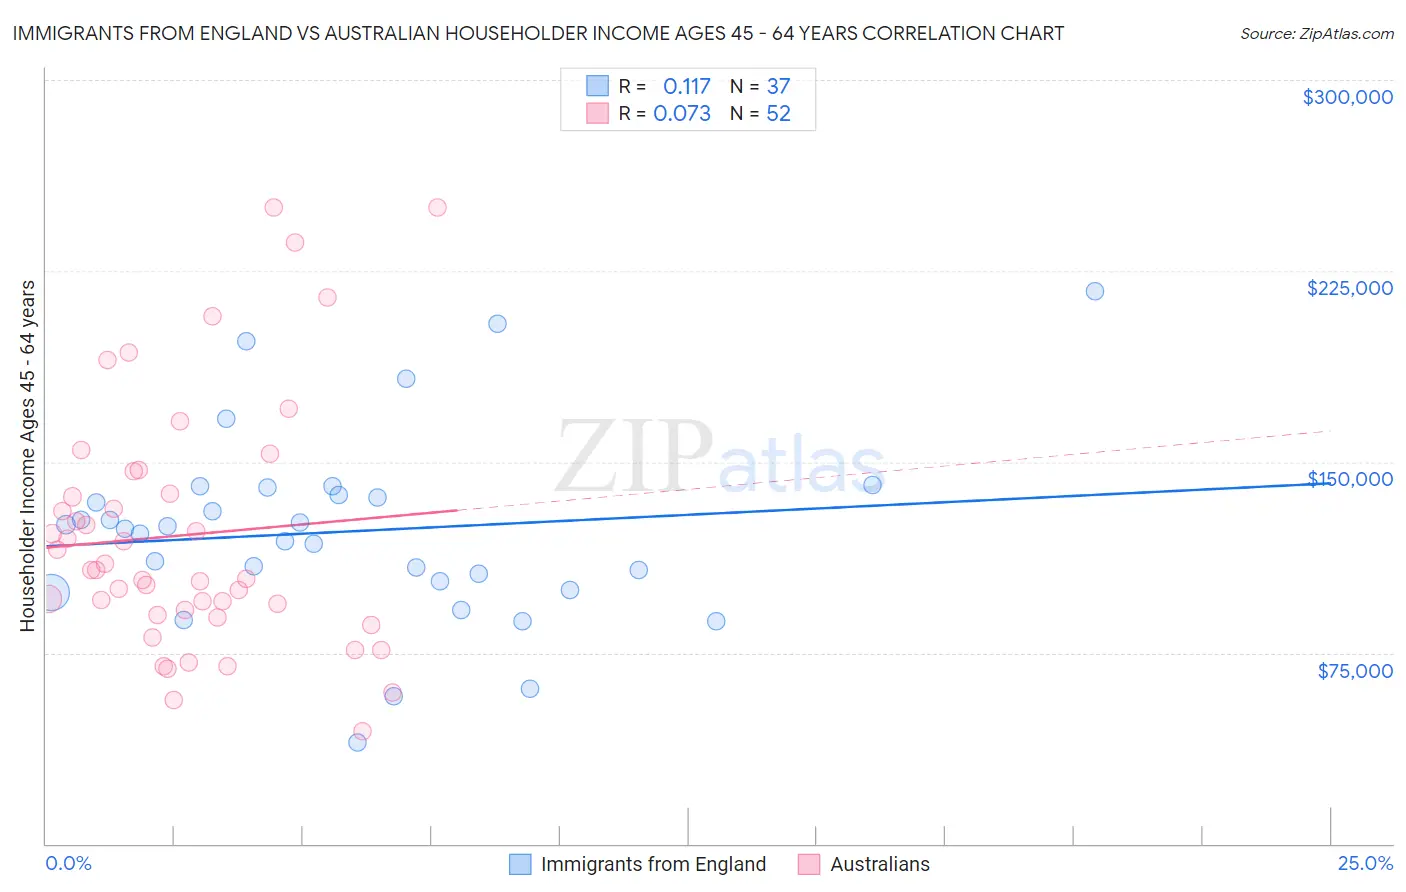 Immigrants from England vs Australian Householder Income Ages 45 - 64 years